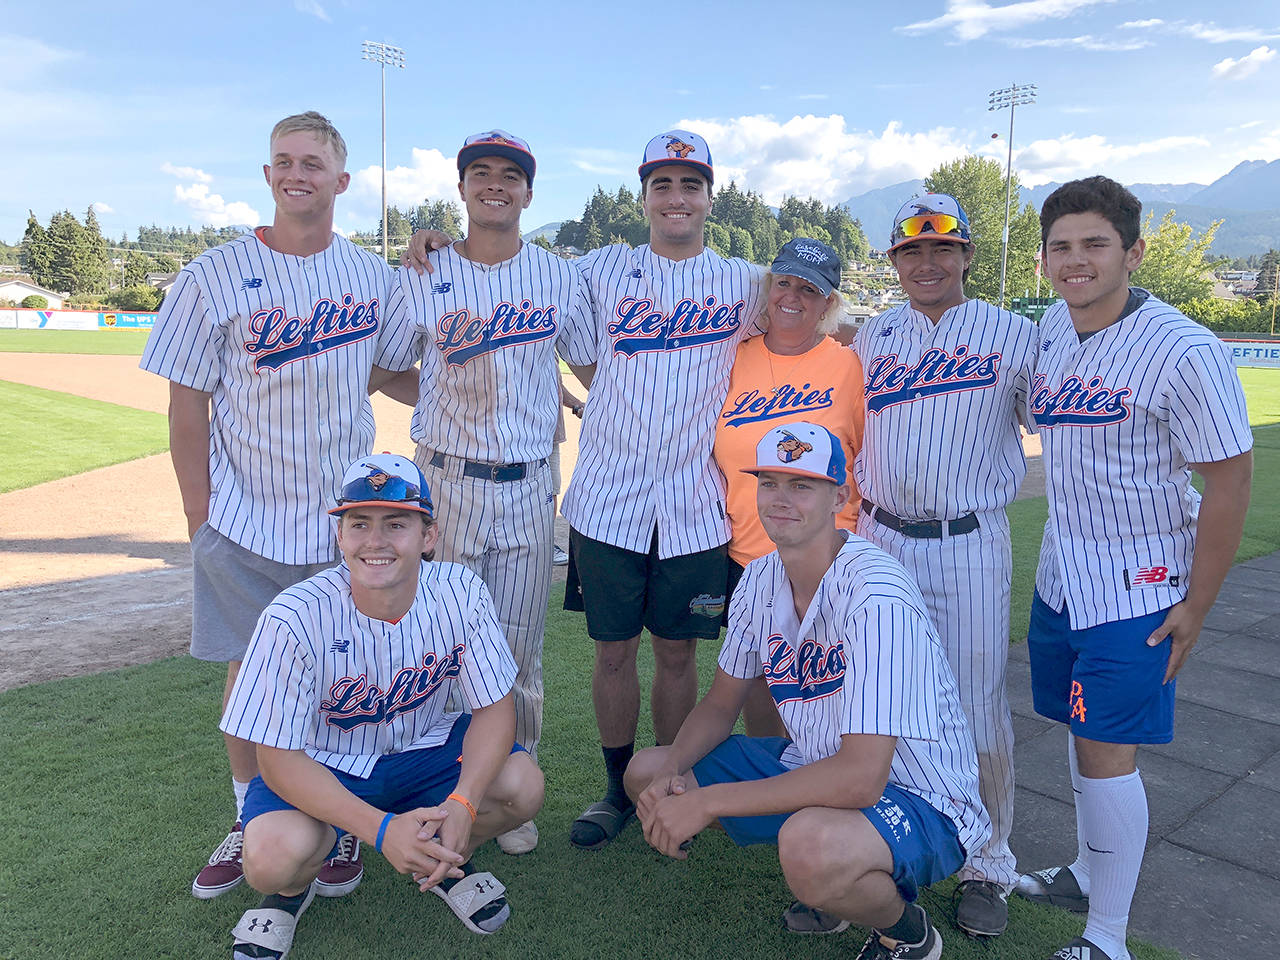 Port Angeles Lefties host family coordinator and host Roxi Baxley (back row, fourth from left) with 2018 Lefties back row, from left, Cameron Allie, Jason Diccochea, Alex Jemal, Baxley, Tristan Hanoian, Avery Santos and front, Tyler Decker and Thomas Rouee.